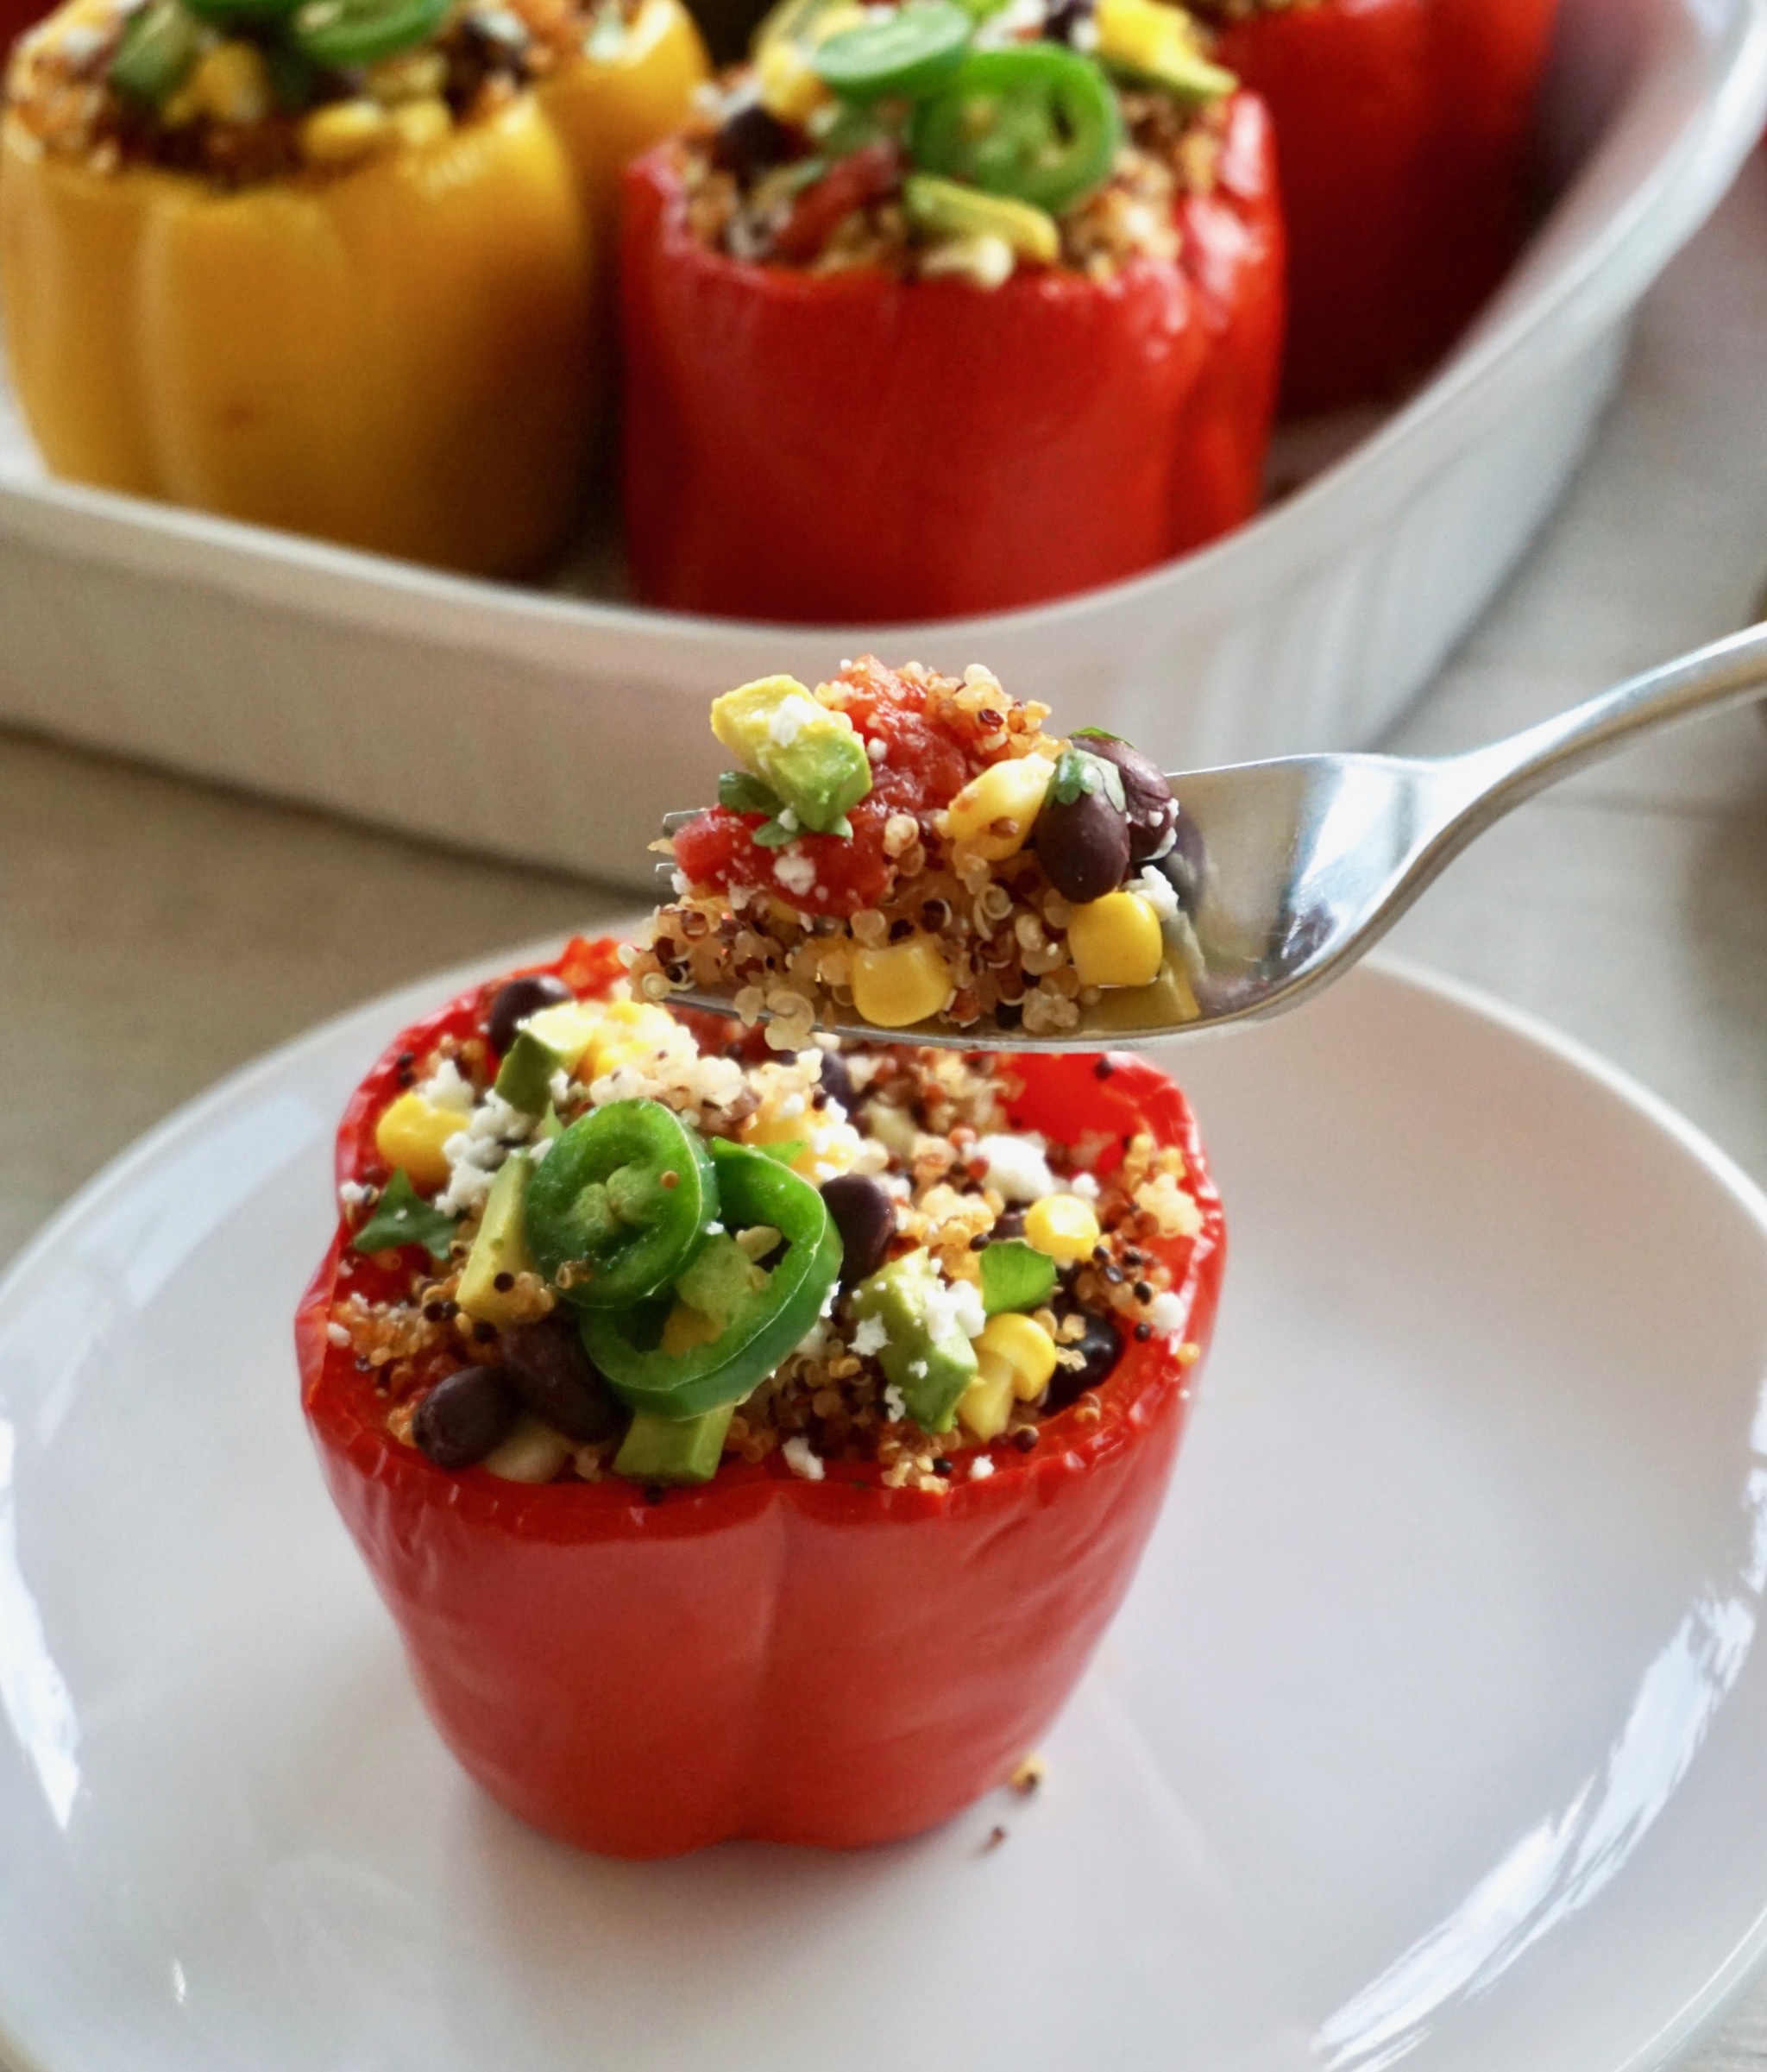 Spicy Mexican Quinoa Stuffed Peppers